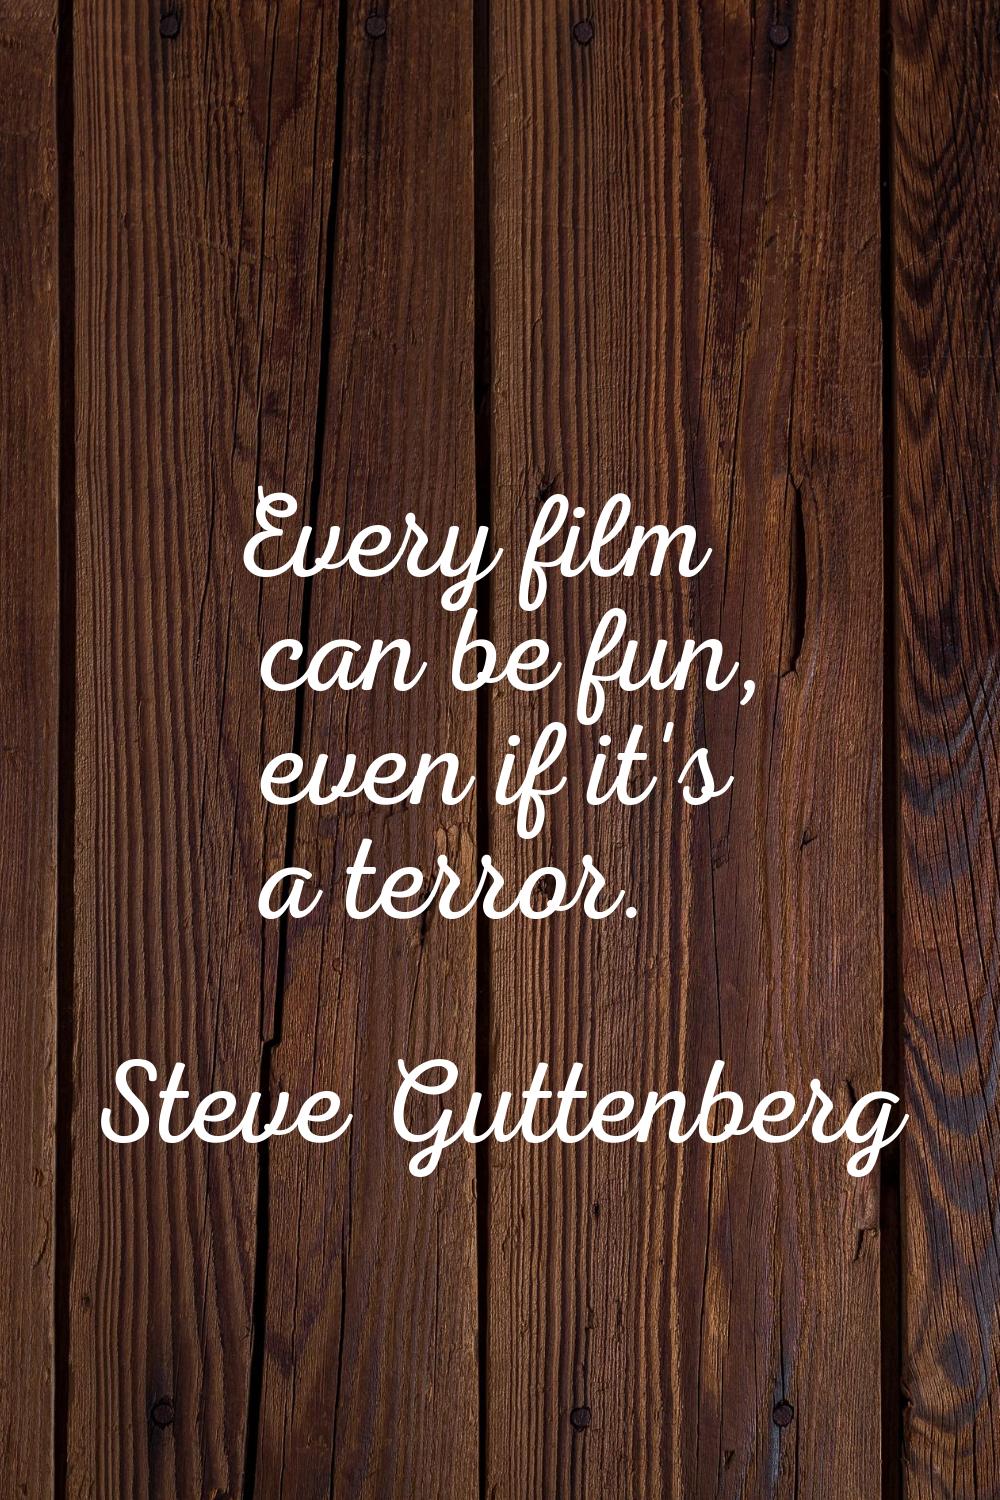 Every film can be fun, even if it's a terror.